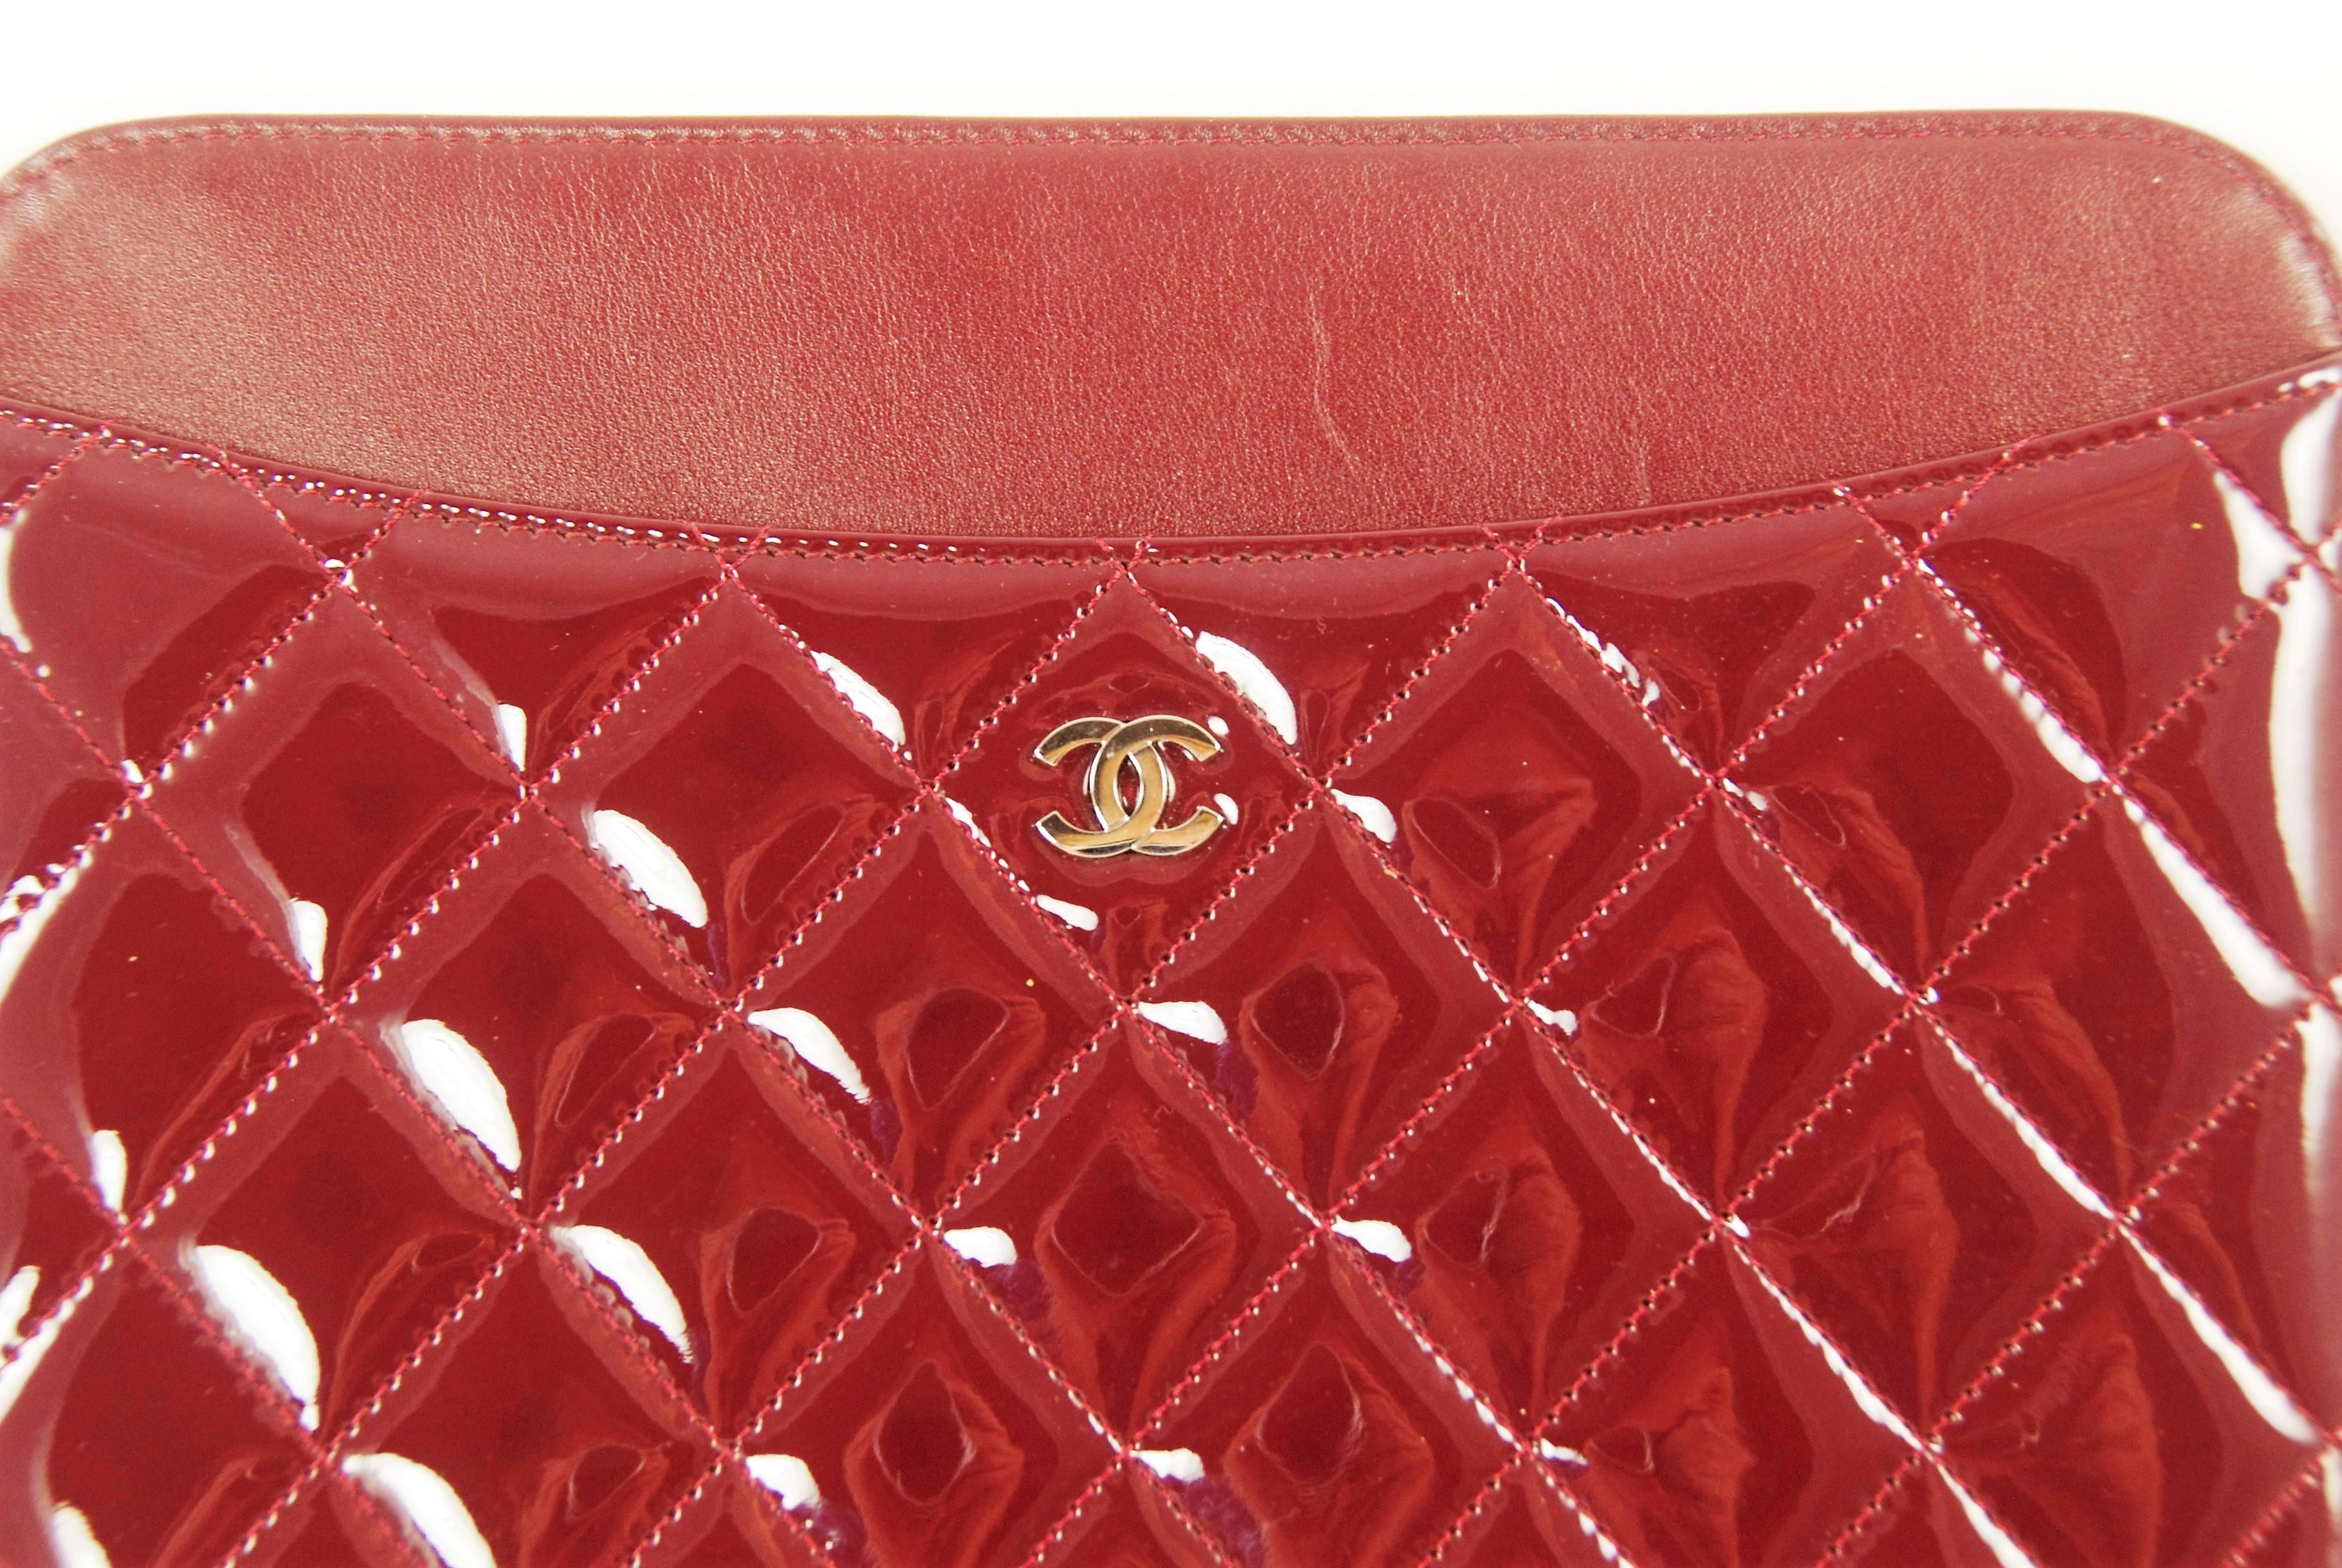 2011 Chanel Burgundy Patent Leather iPad Case For Sale 2